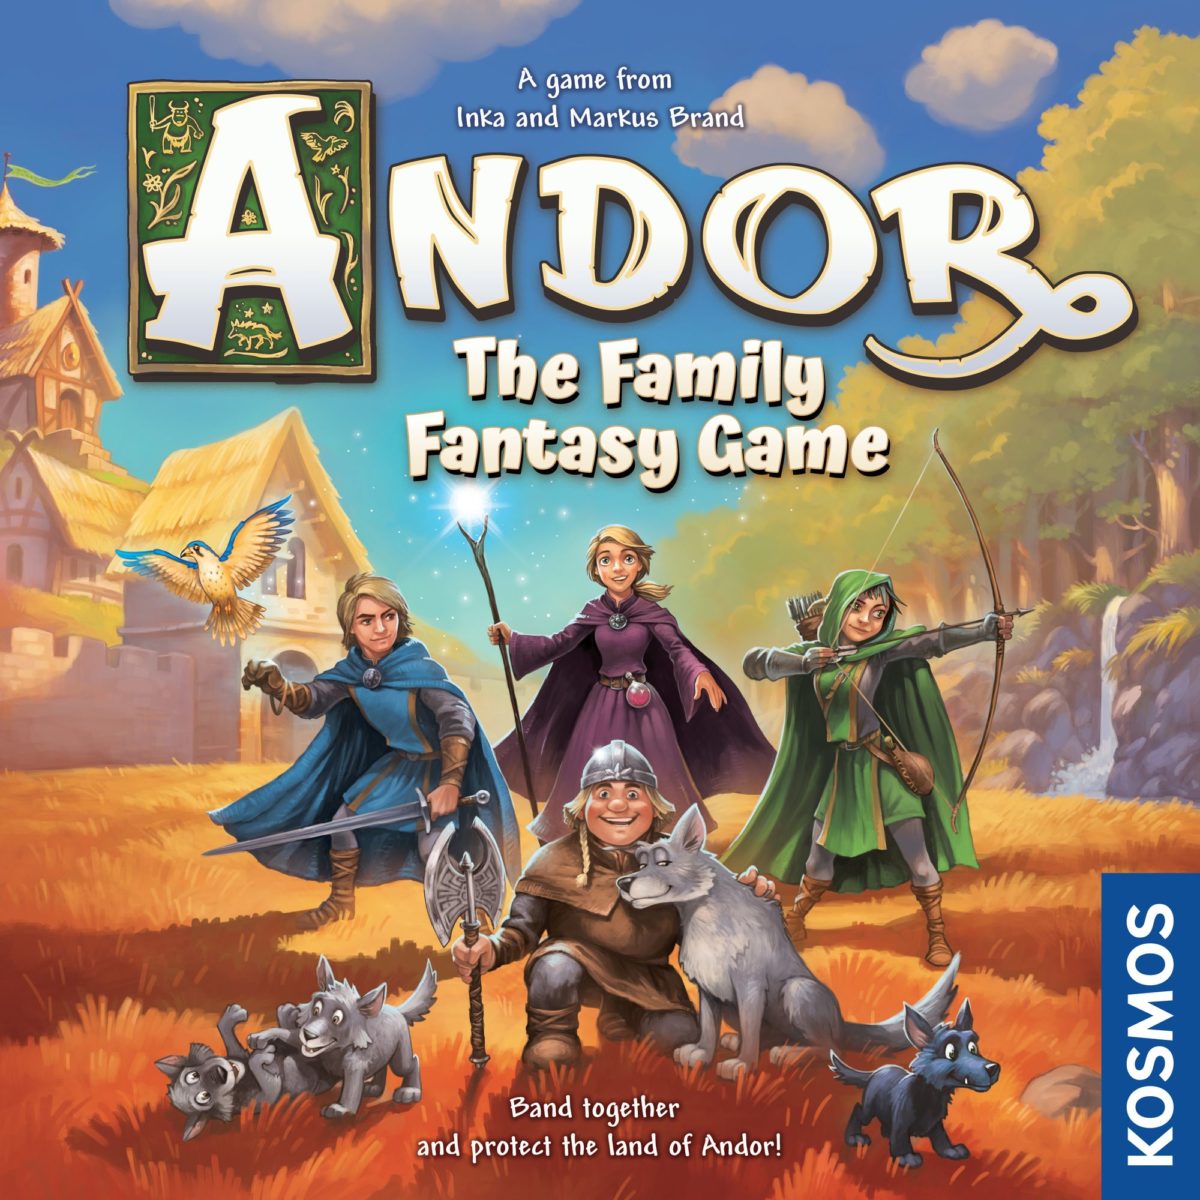 Image shows the box cover of Andor: The Family Fantasy Game by Kosmos Games. Image by Kosmos Games.